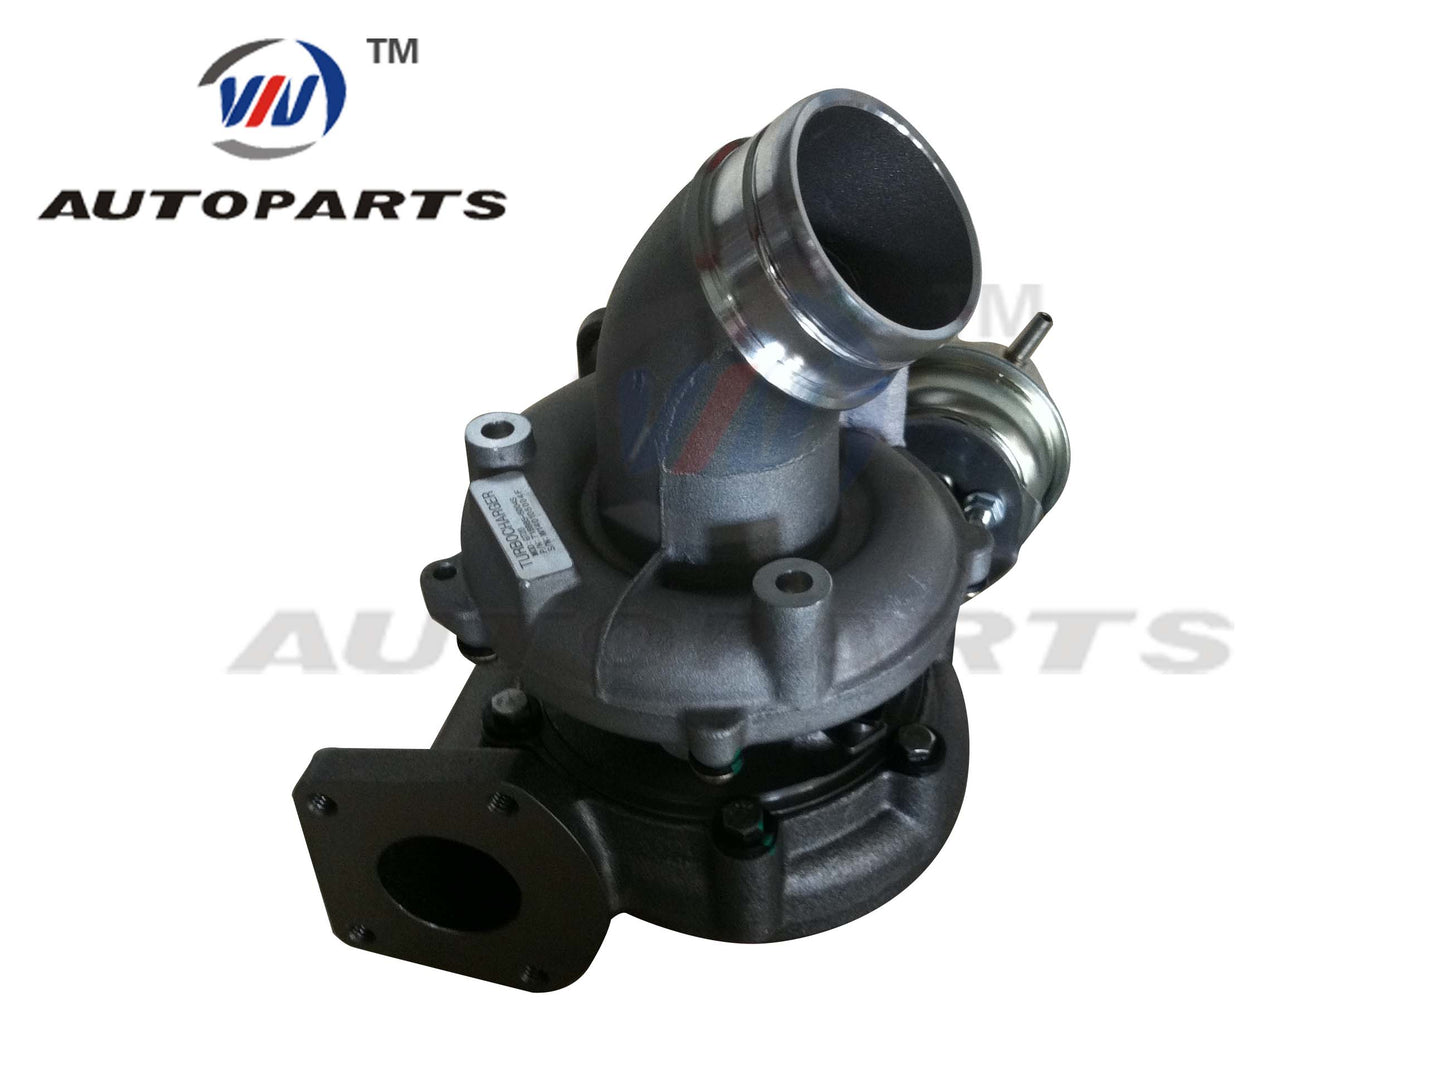 Turbocharger 716885-5004S for Volkswagen Touareg with 2.5L Diesel Engine